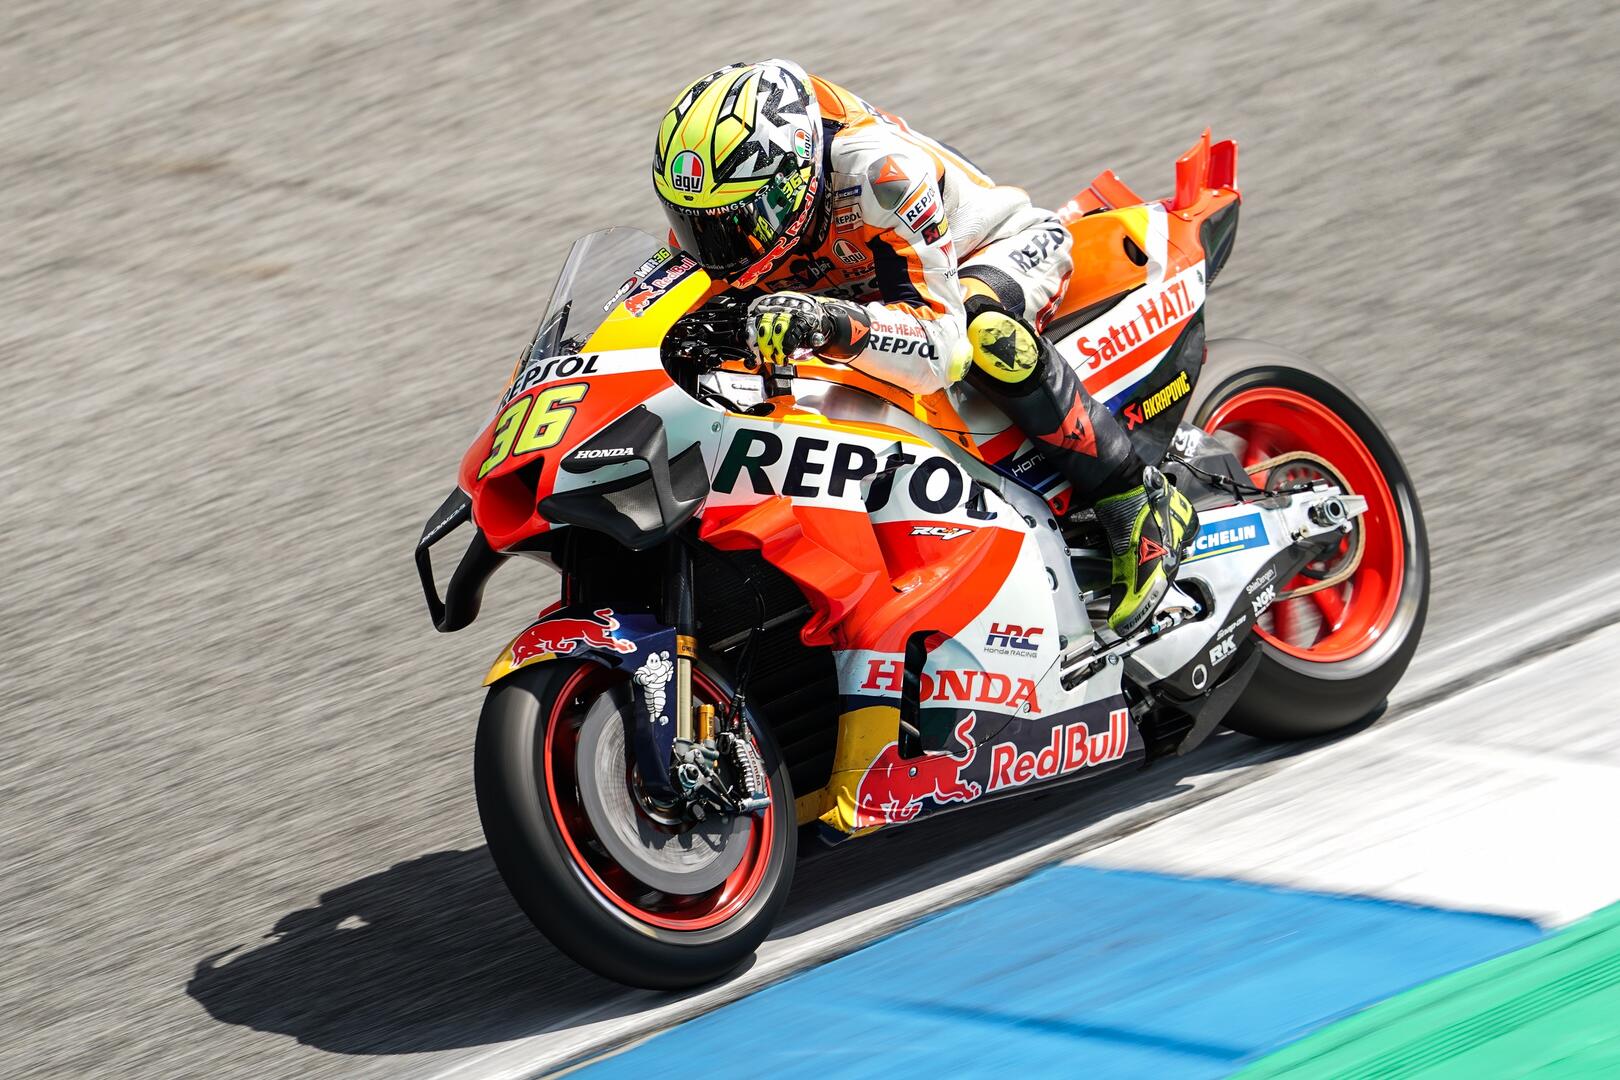 Marquez stars in Sprint to fiery fourth, Mir recovers seven places